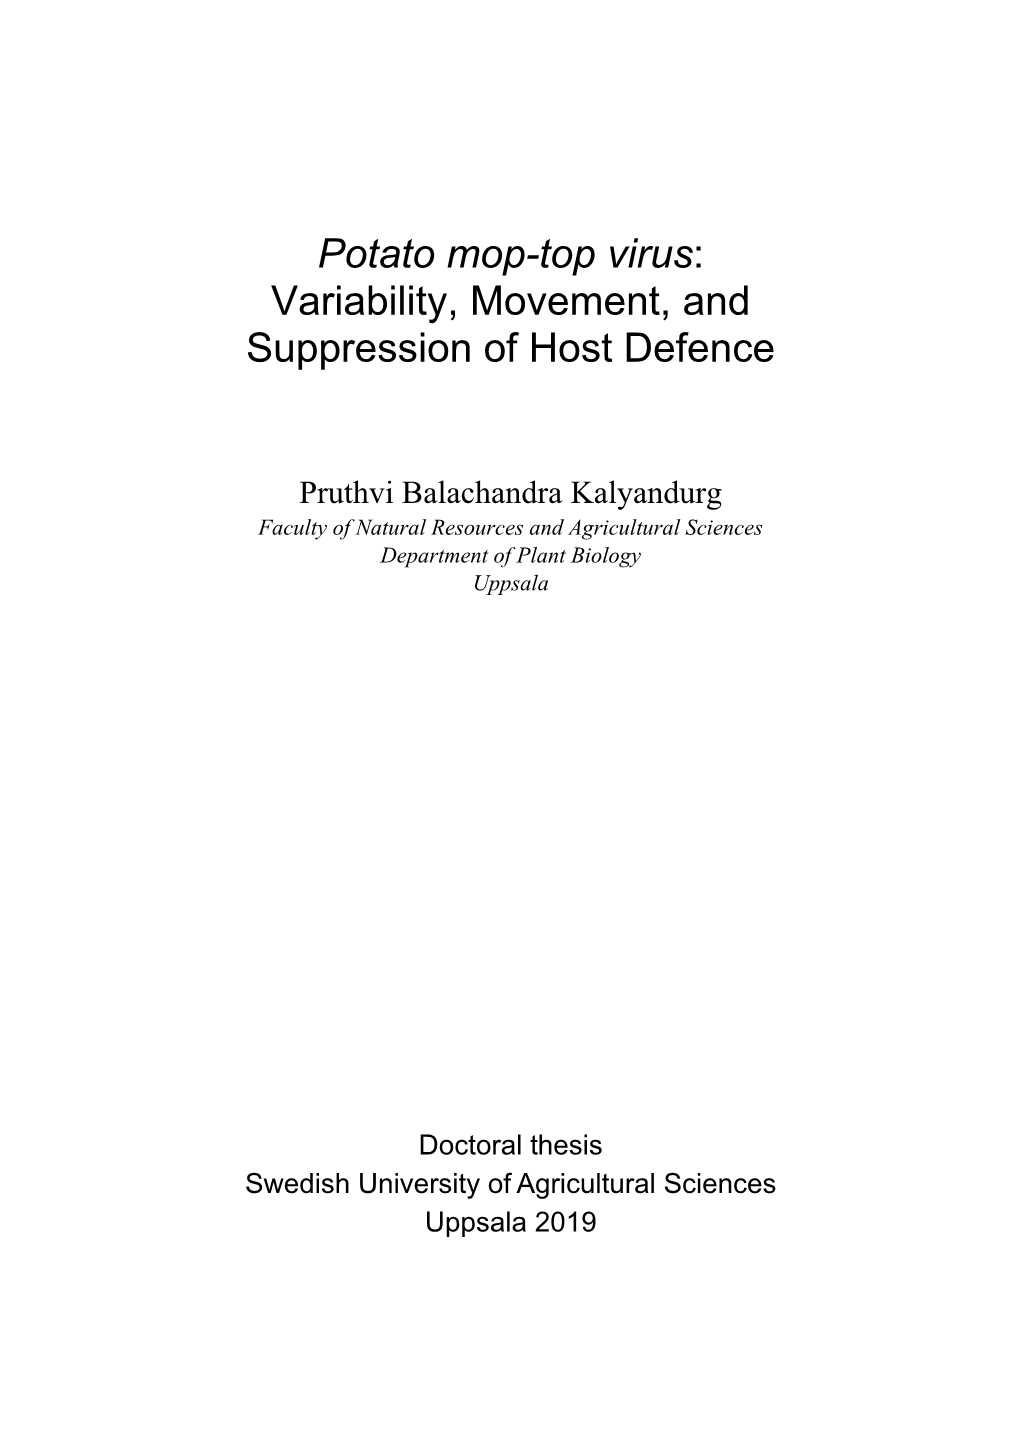 Potato Mop-Top Virus: Variability, Movement, and Suppression of Host Defence